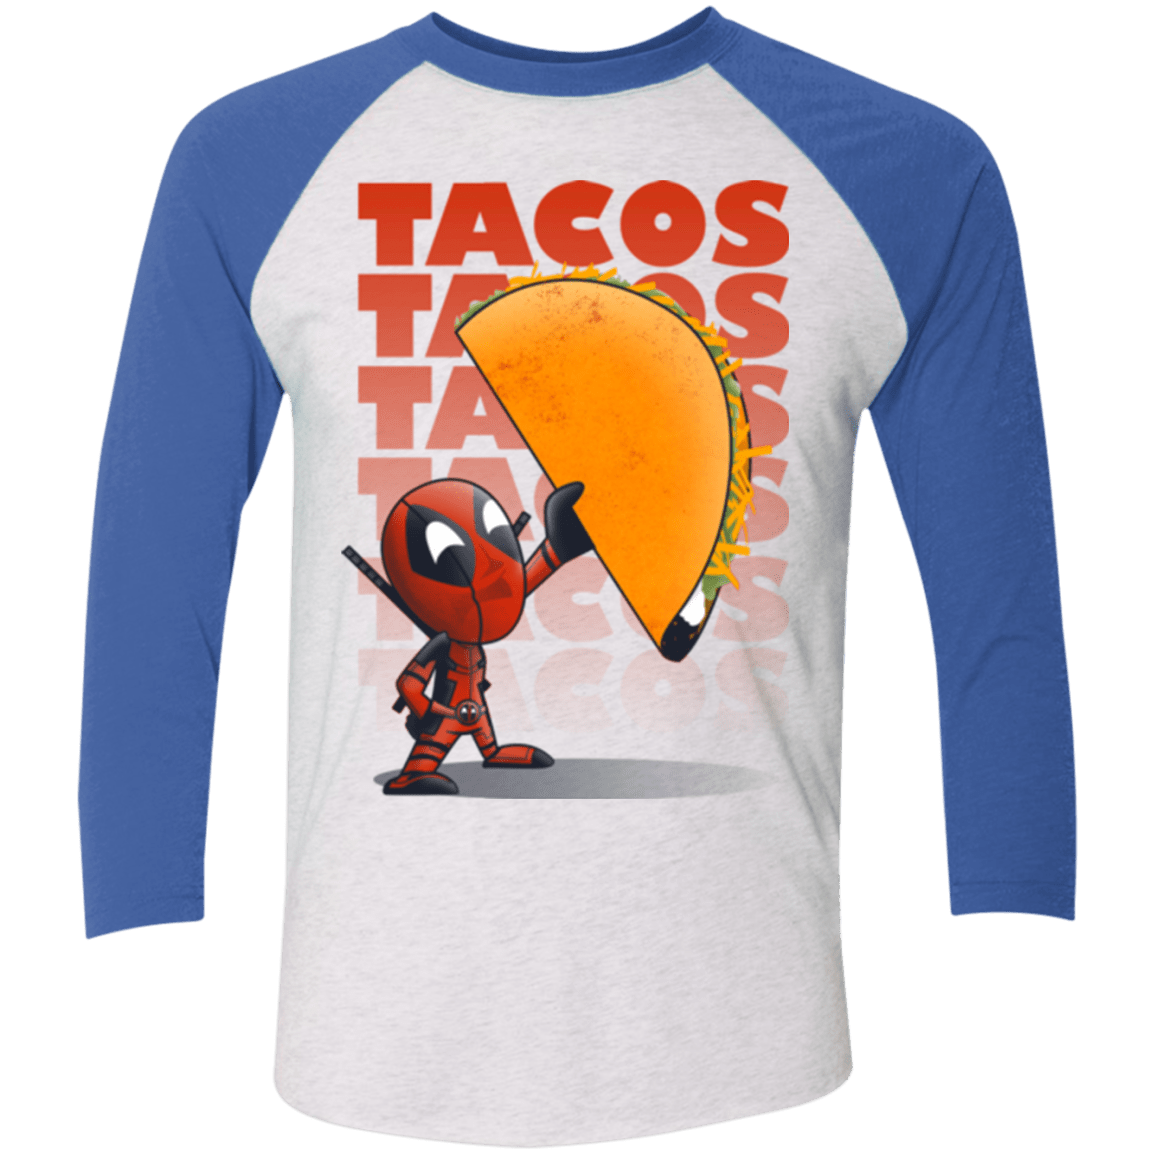 T-Shirts Heather White/Vintage Royal / X-Small Tacos Triblend 3/4 Sleeve